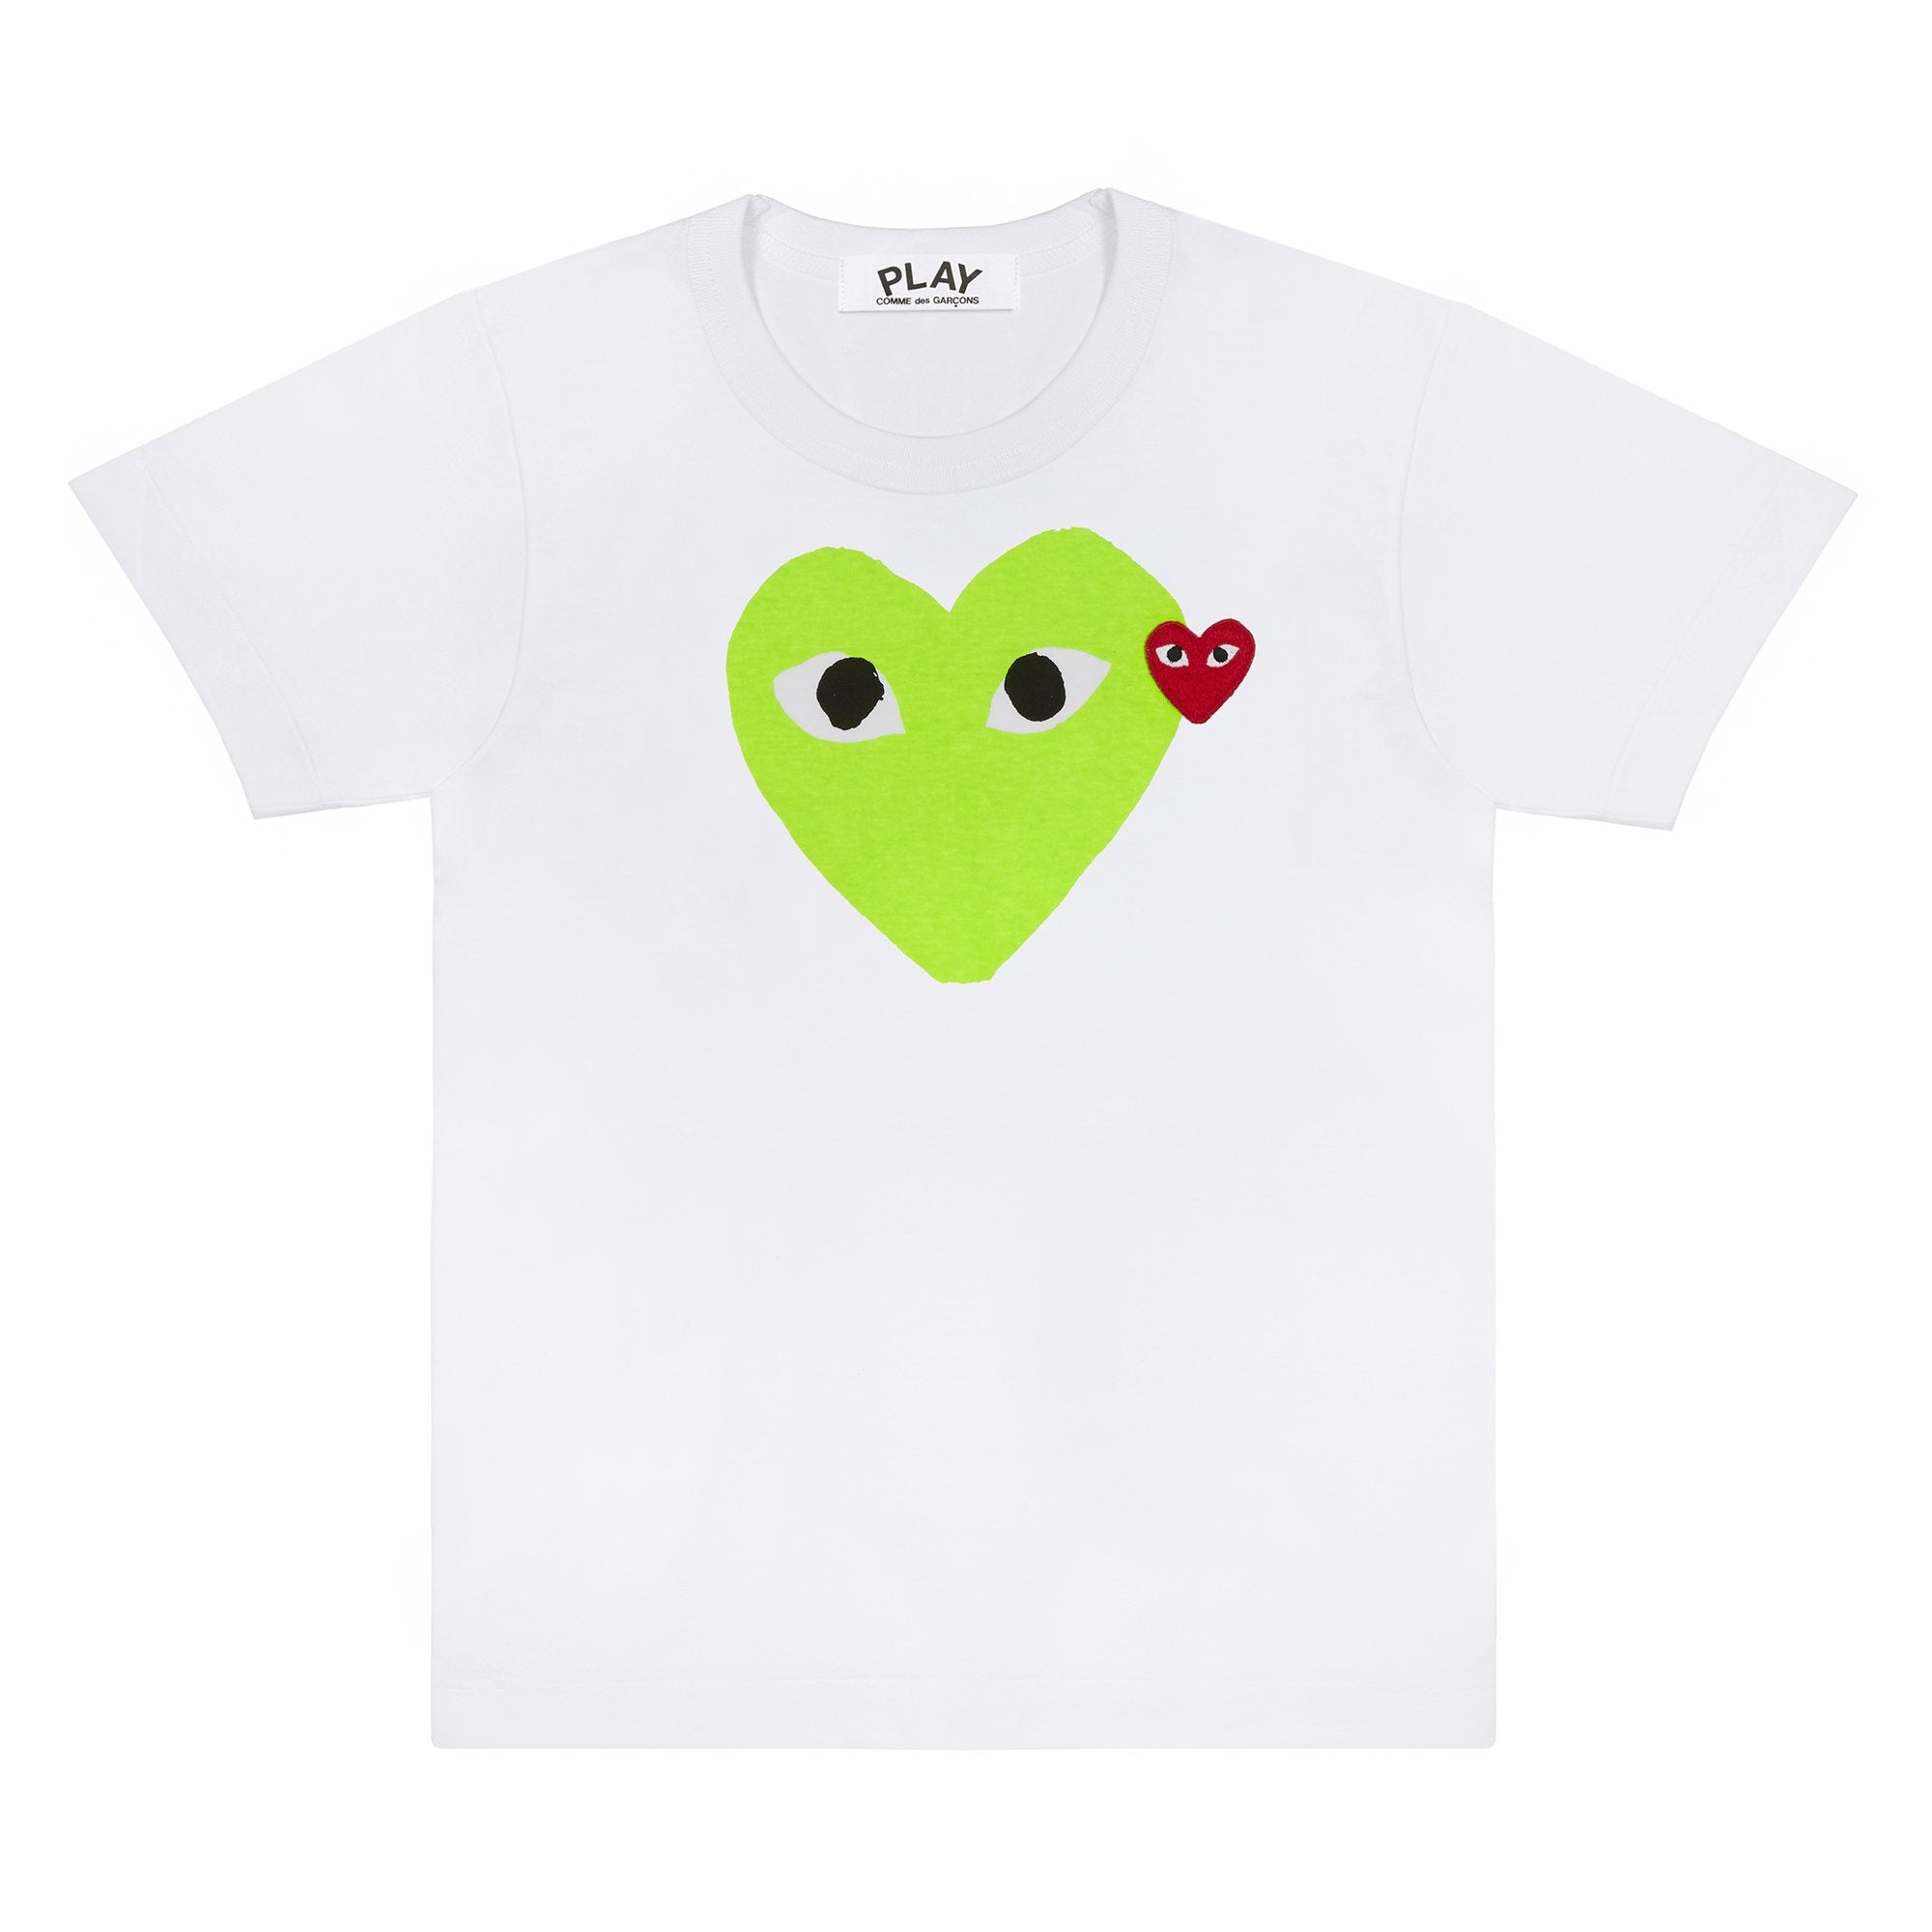 PLAY T-Shirt Pastel Heart and Red Emblem (Green)